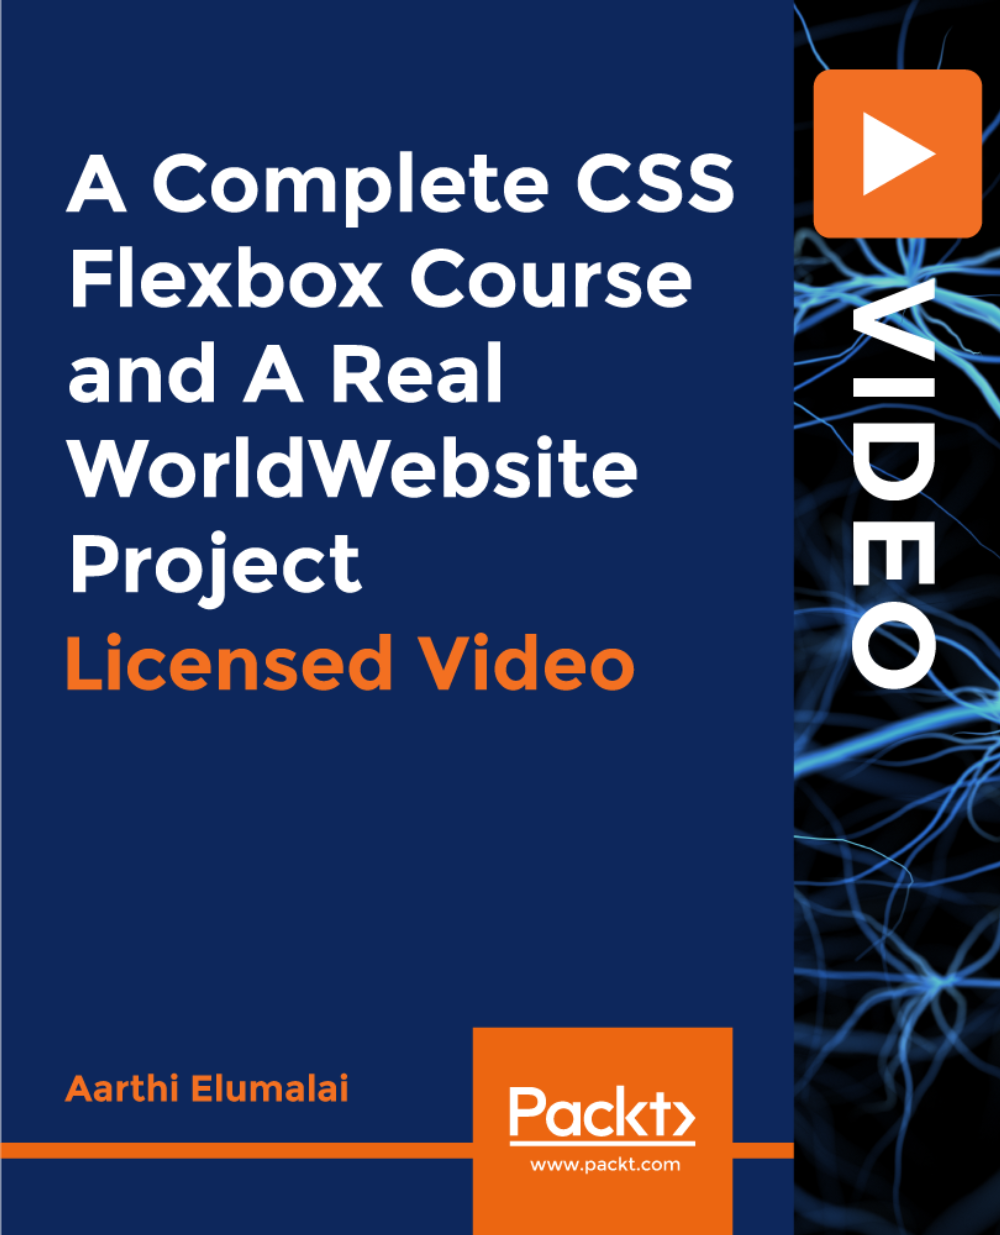 A Complete CSS Flexbox Course and a Real World Website Project